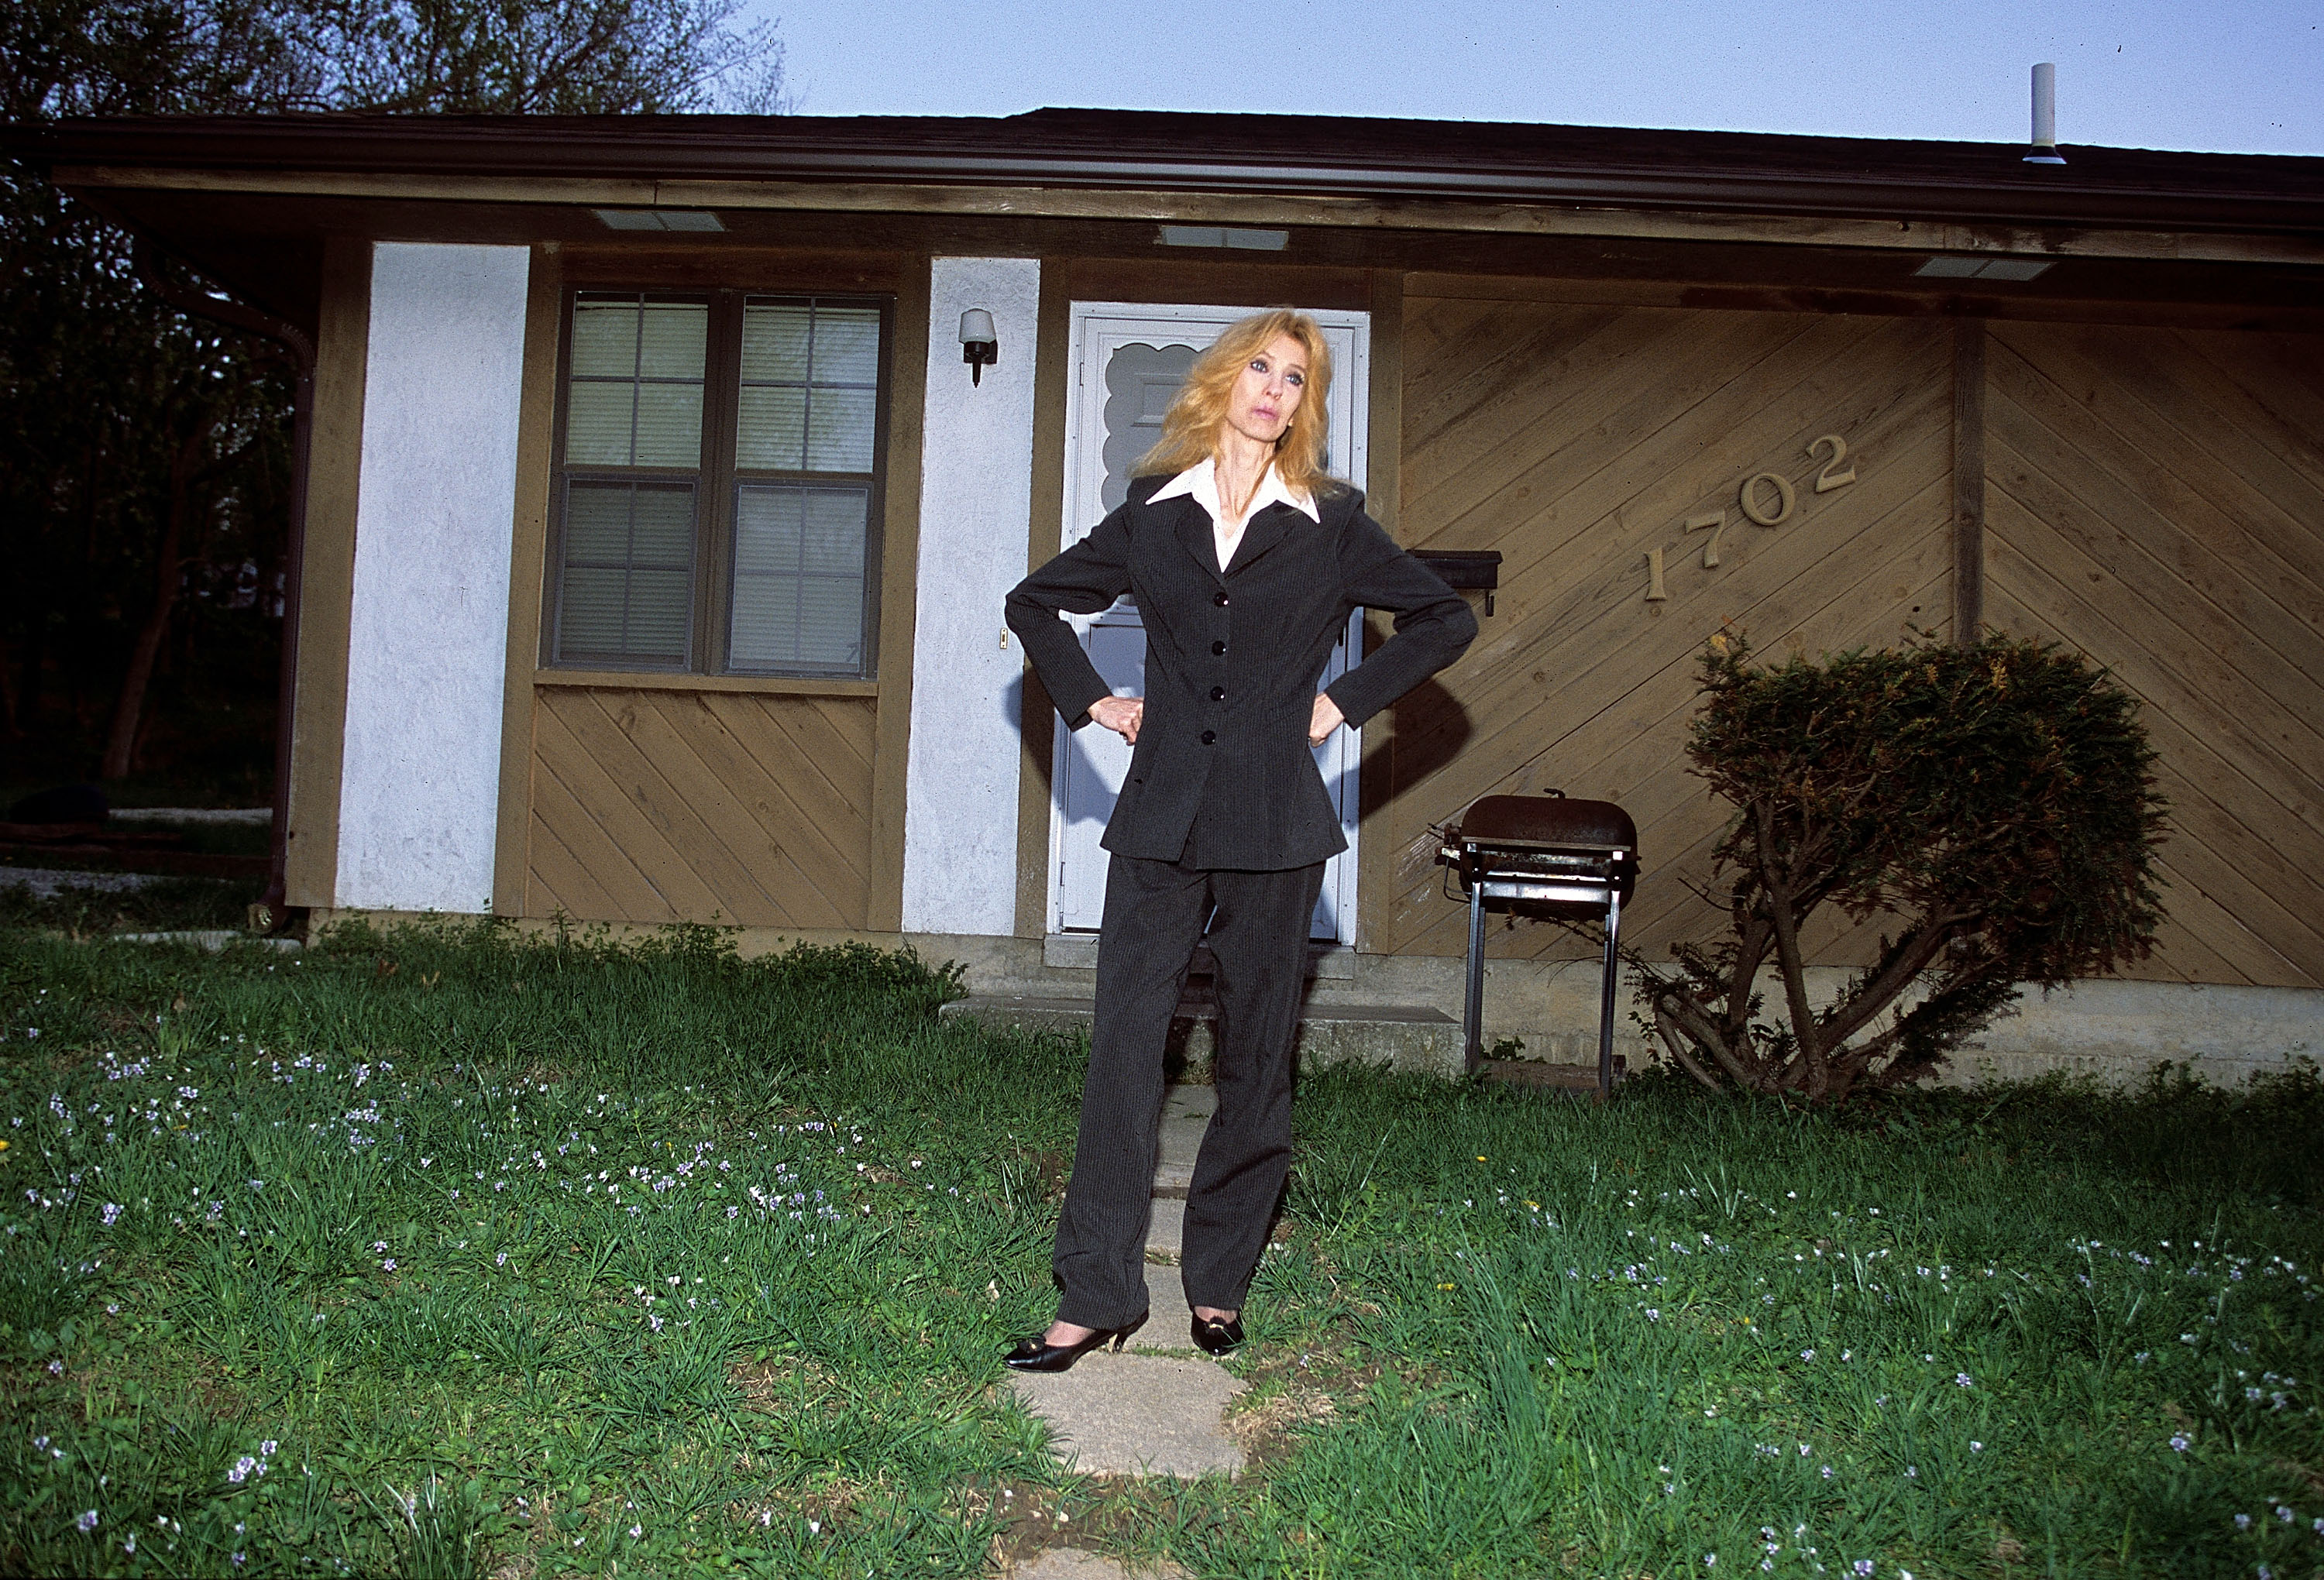 Debbie Mathers during a portrait session outside her house in September, 2005 in Detroit, Michigan. | Source: Getty Images